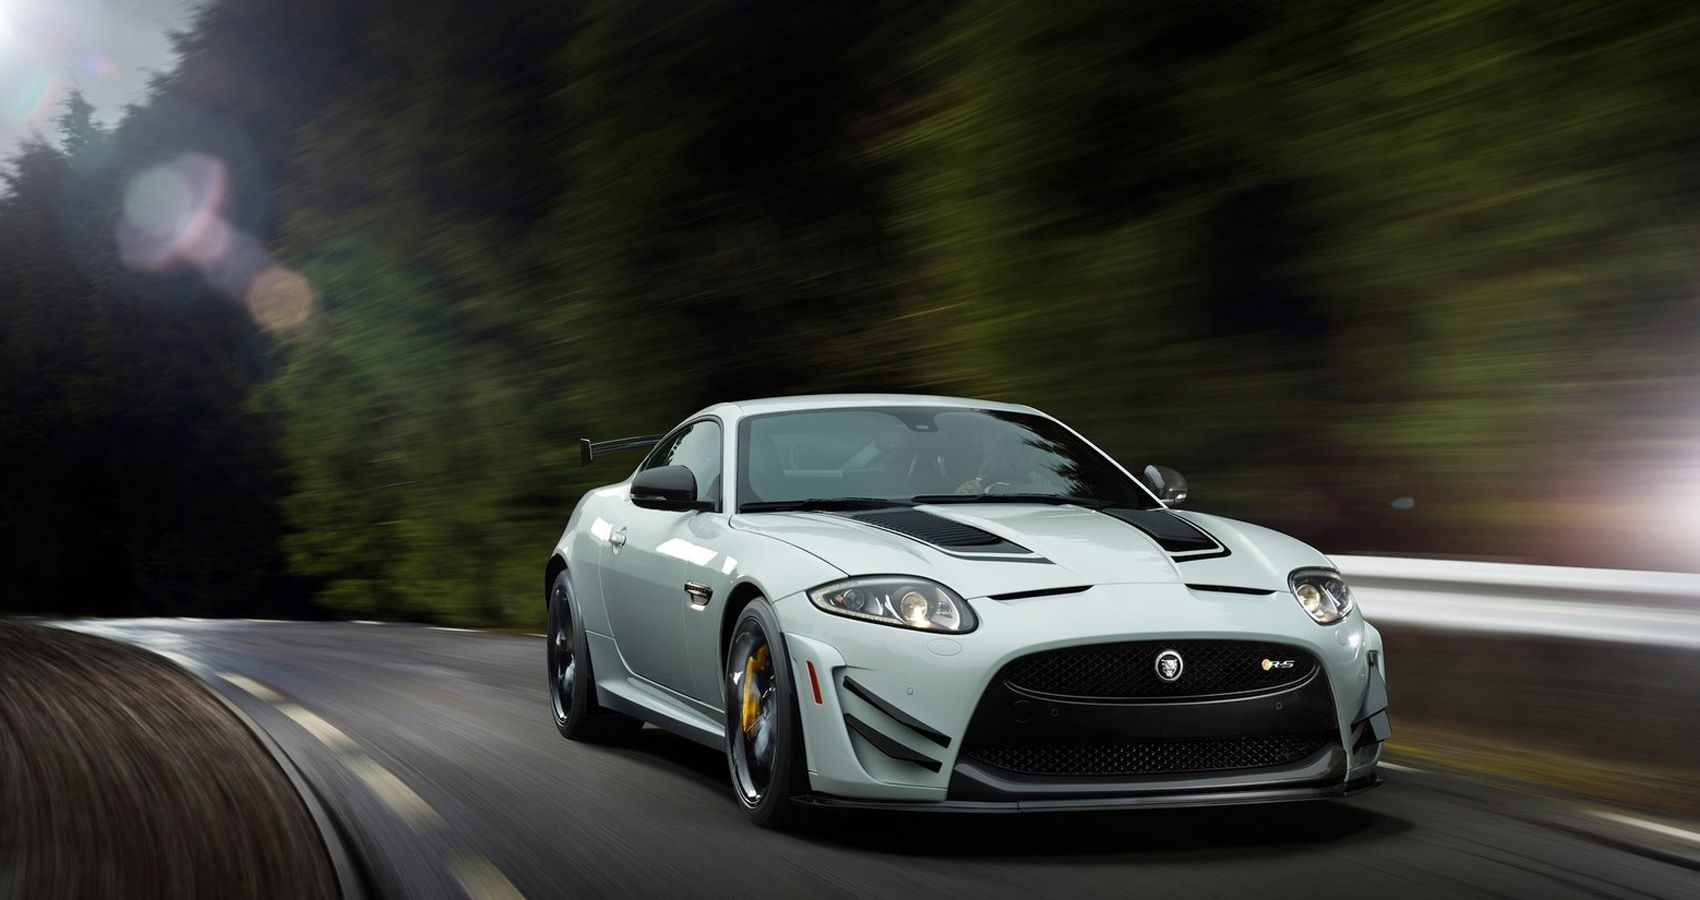 The front of the XKR-S GT on the move